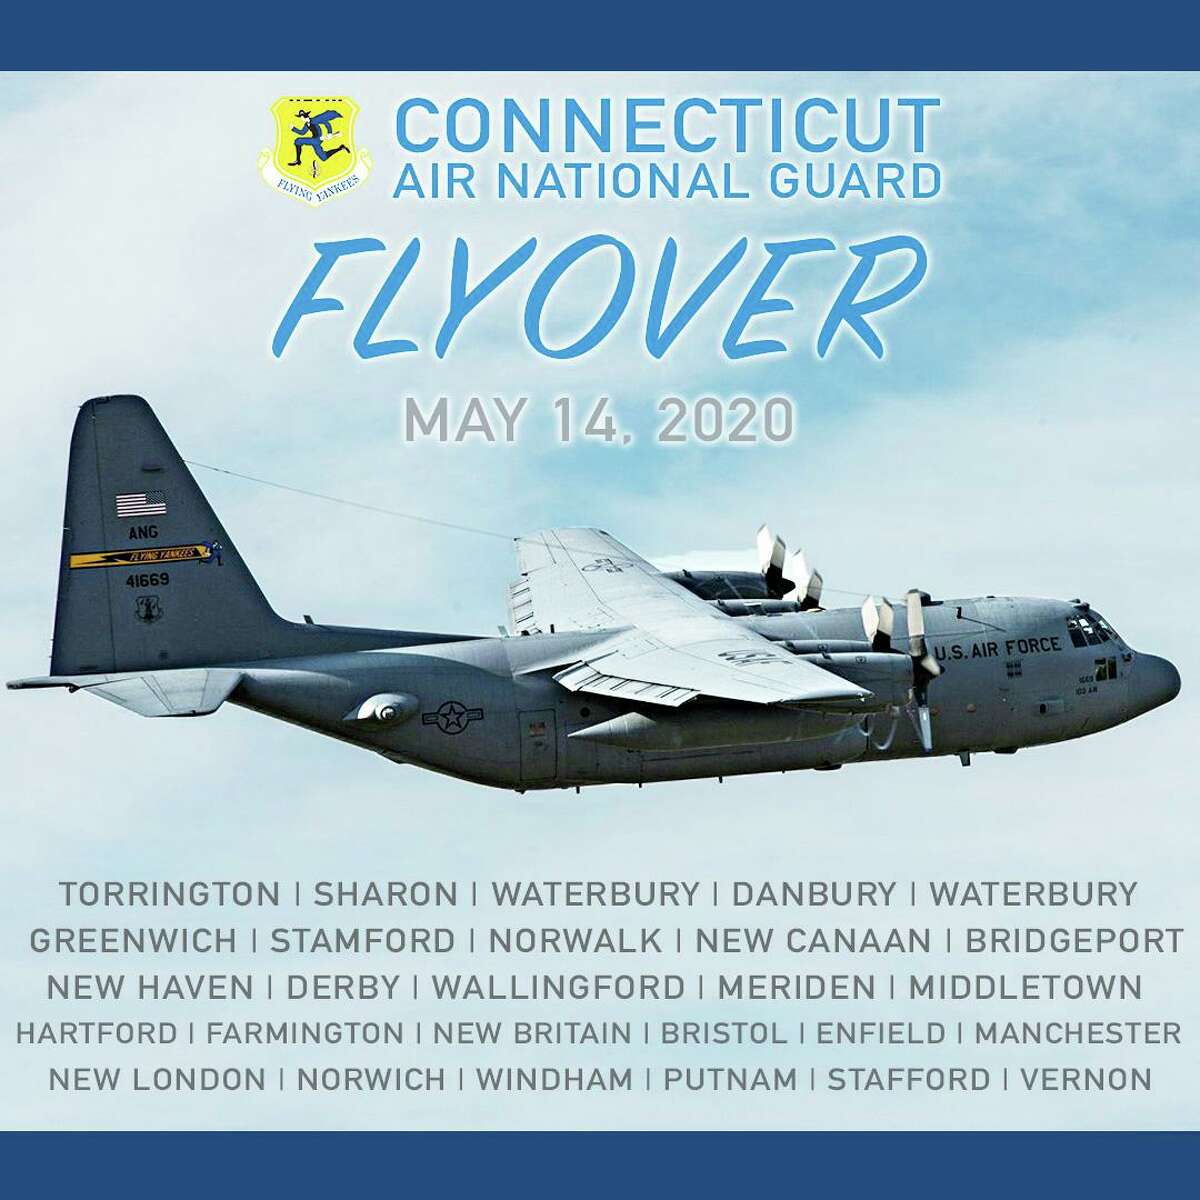 The Connecticut National Guard will be flying large C-130 transport planes as they make their way across Connecticut Thursday, in a salute to workers at more than a dozen hospitals.